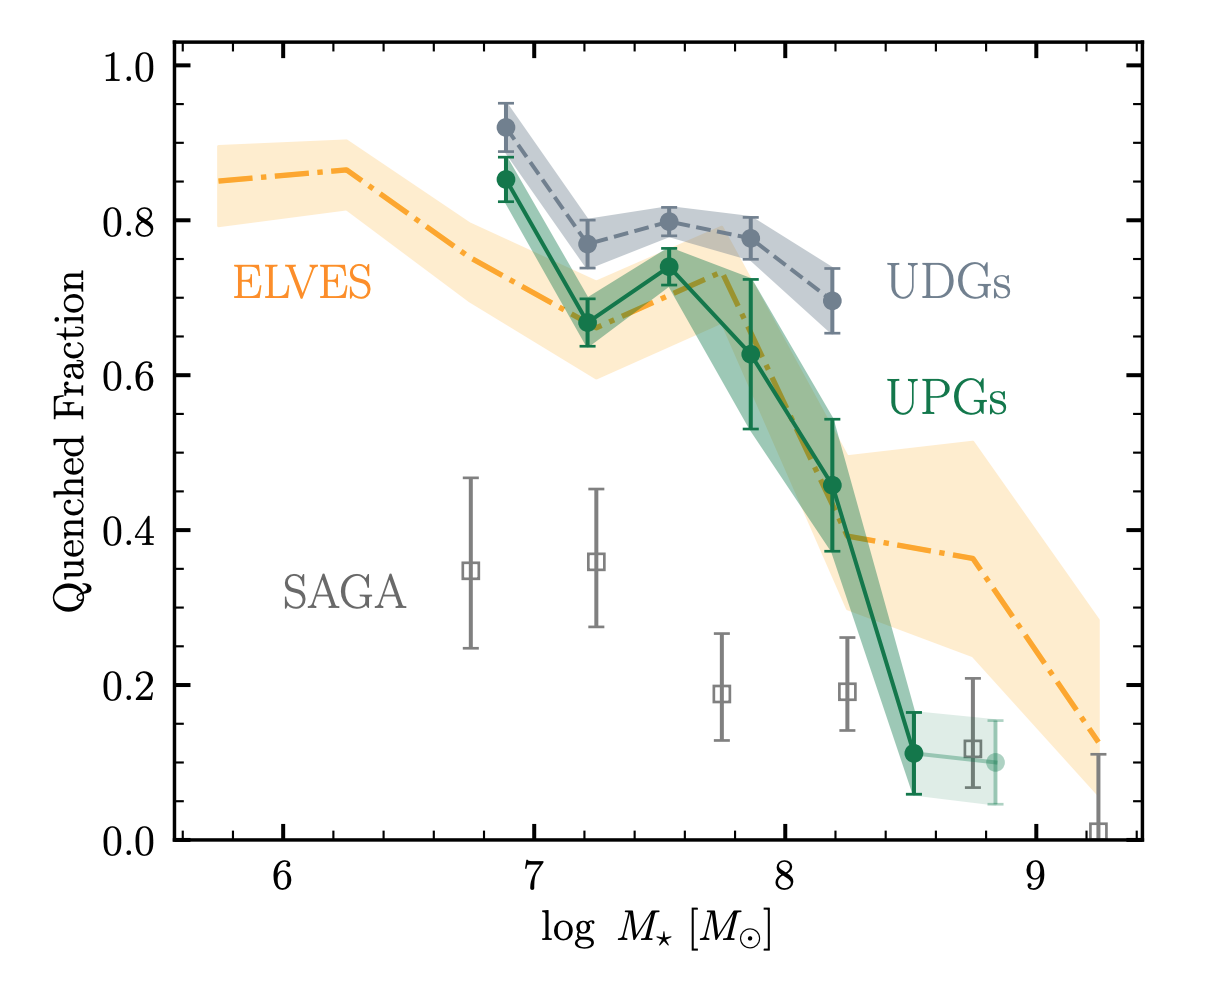 The quenched fractions of UDGs (gray), UPGs (green), normal-sized satellites (orange) as a function of stellar mass.